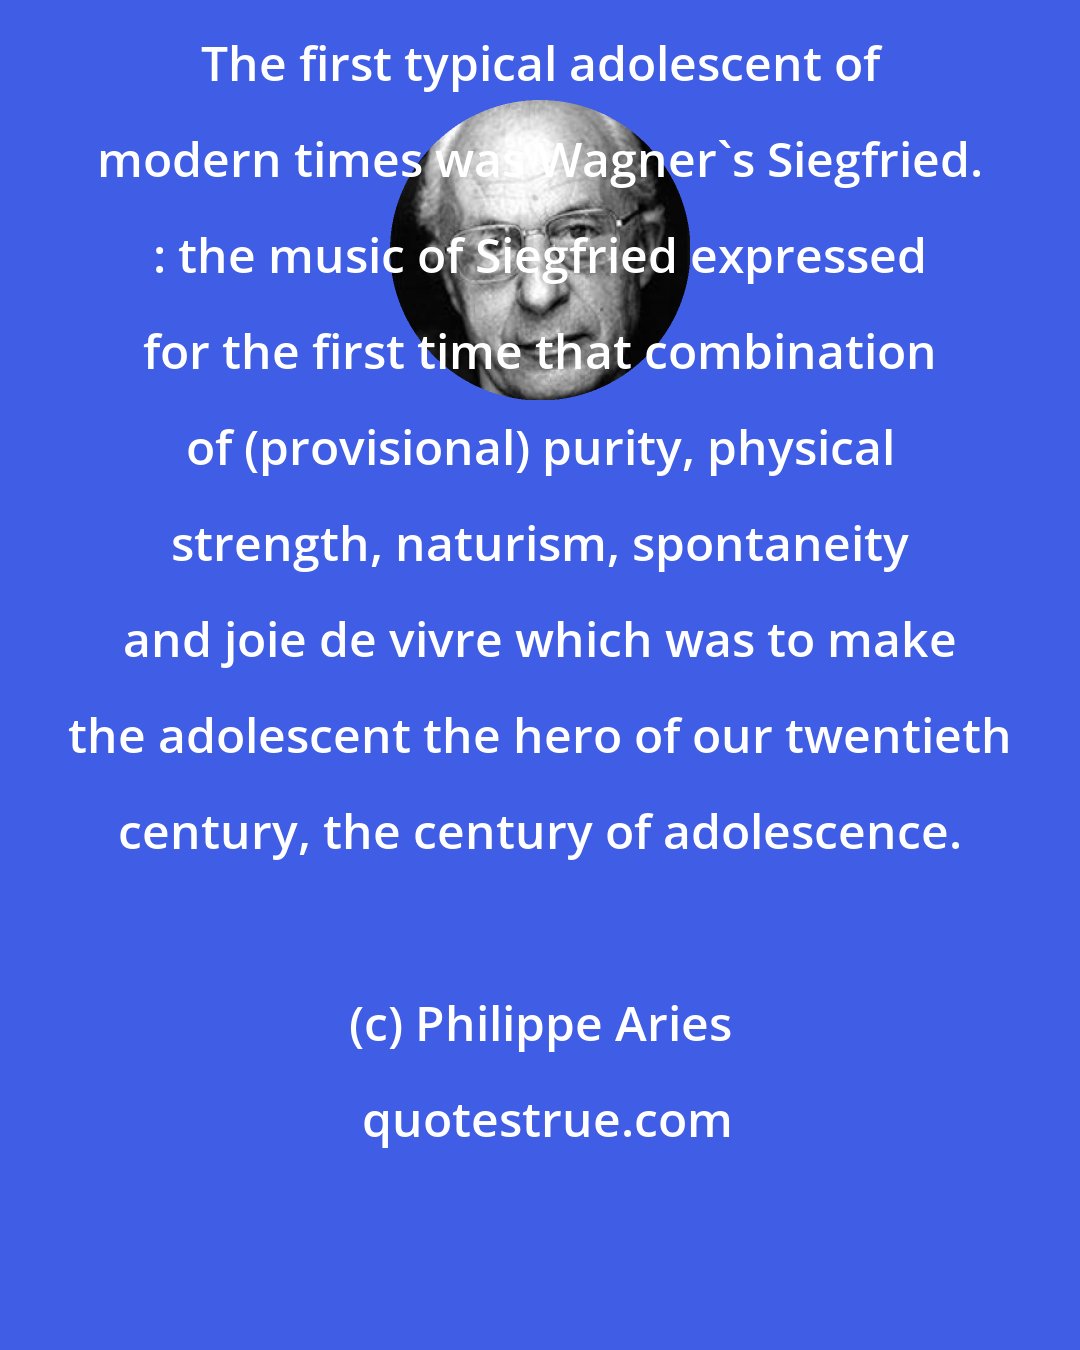 Philippe Aries: The first typical adolescent of modern times was Wagner's Siegfried. : the music of Siegfried expressed for the first time that combination of (provisional) purity, physical strength, naturism, spontaneity and joie de vivre which was to make the adolescent the hero of our twentieth century, the century of adolescence.